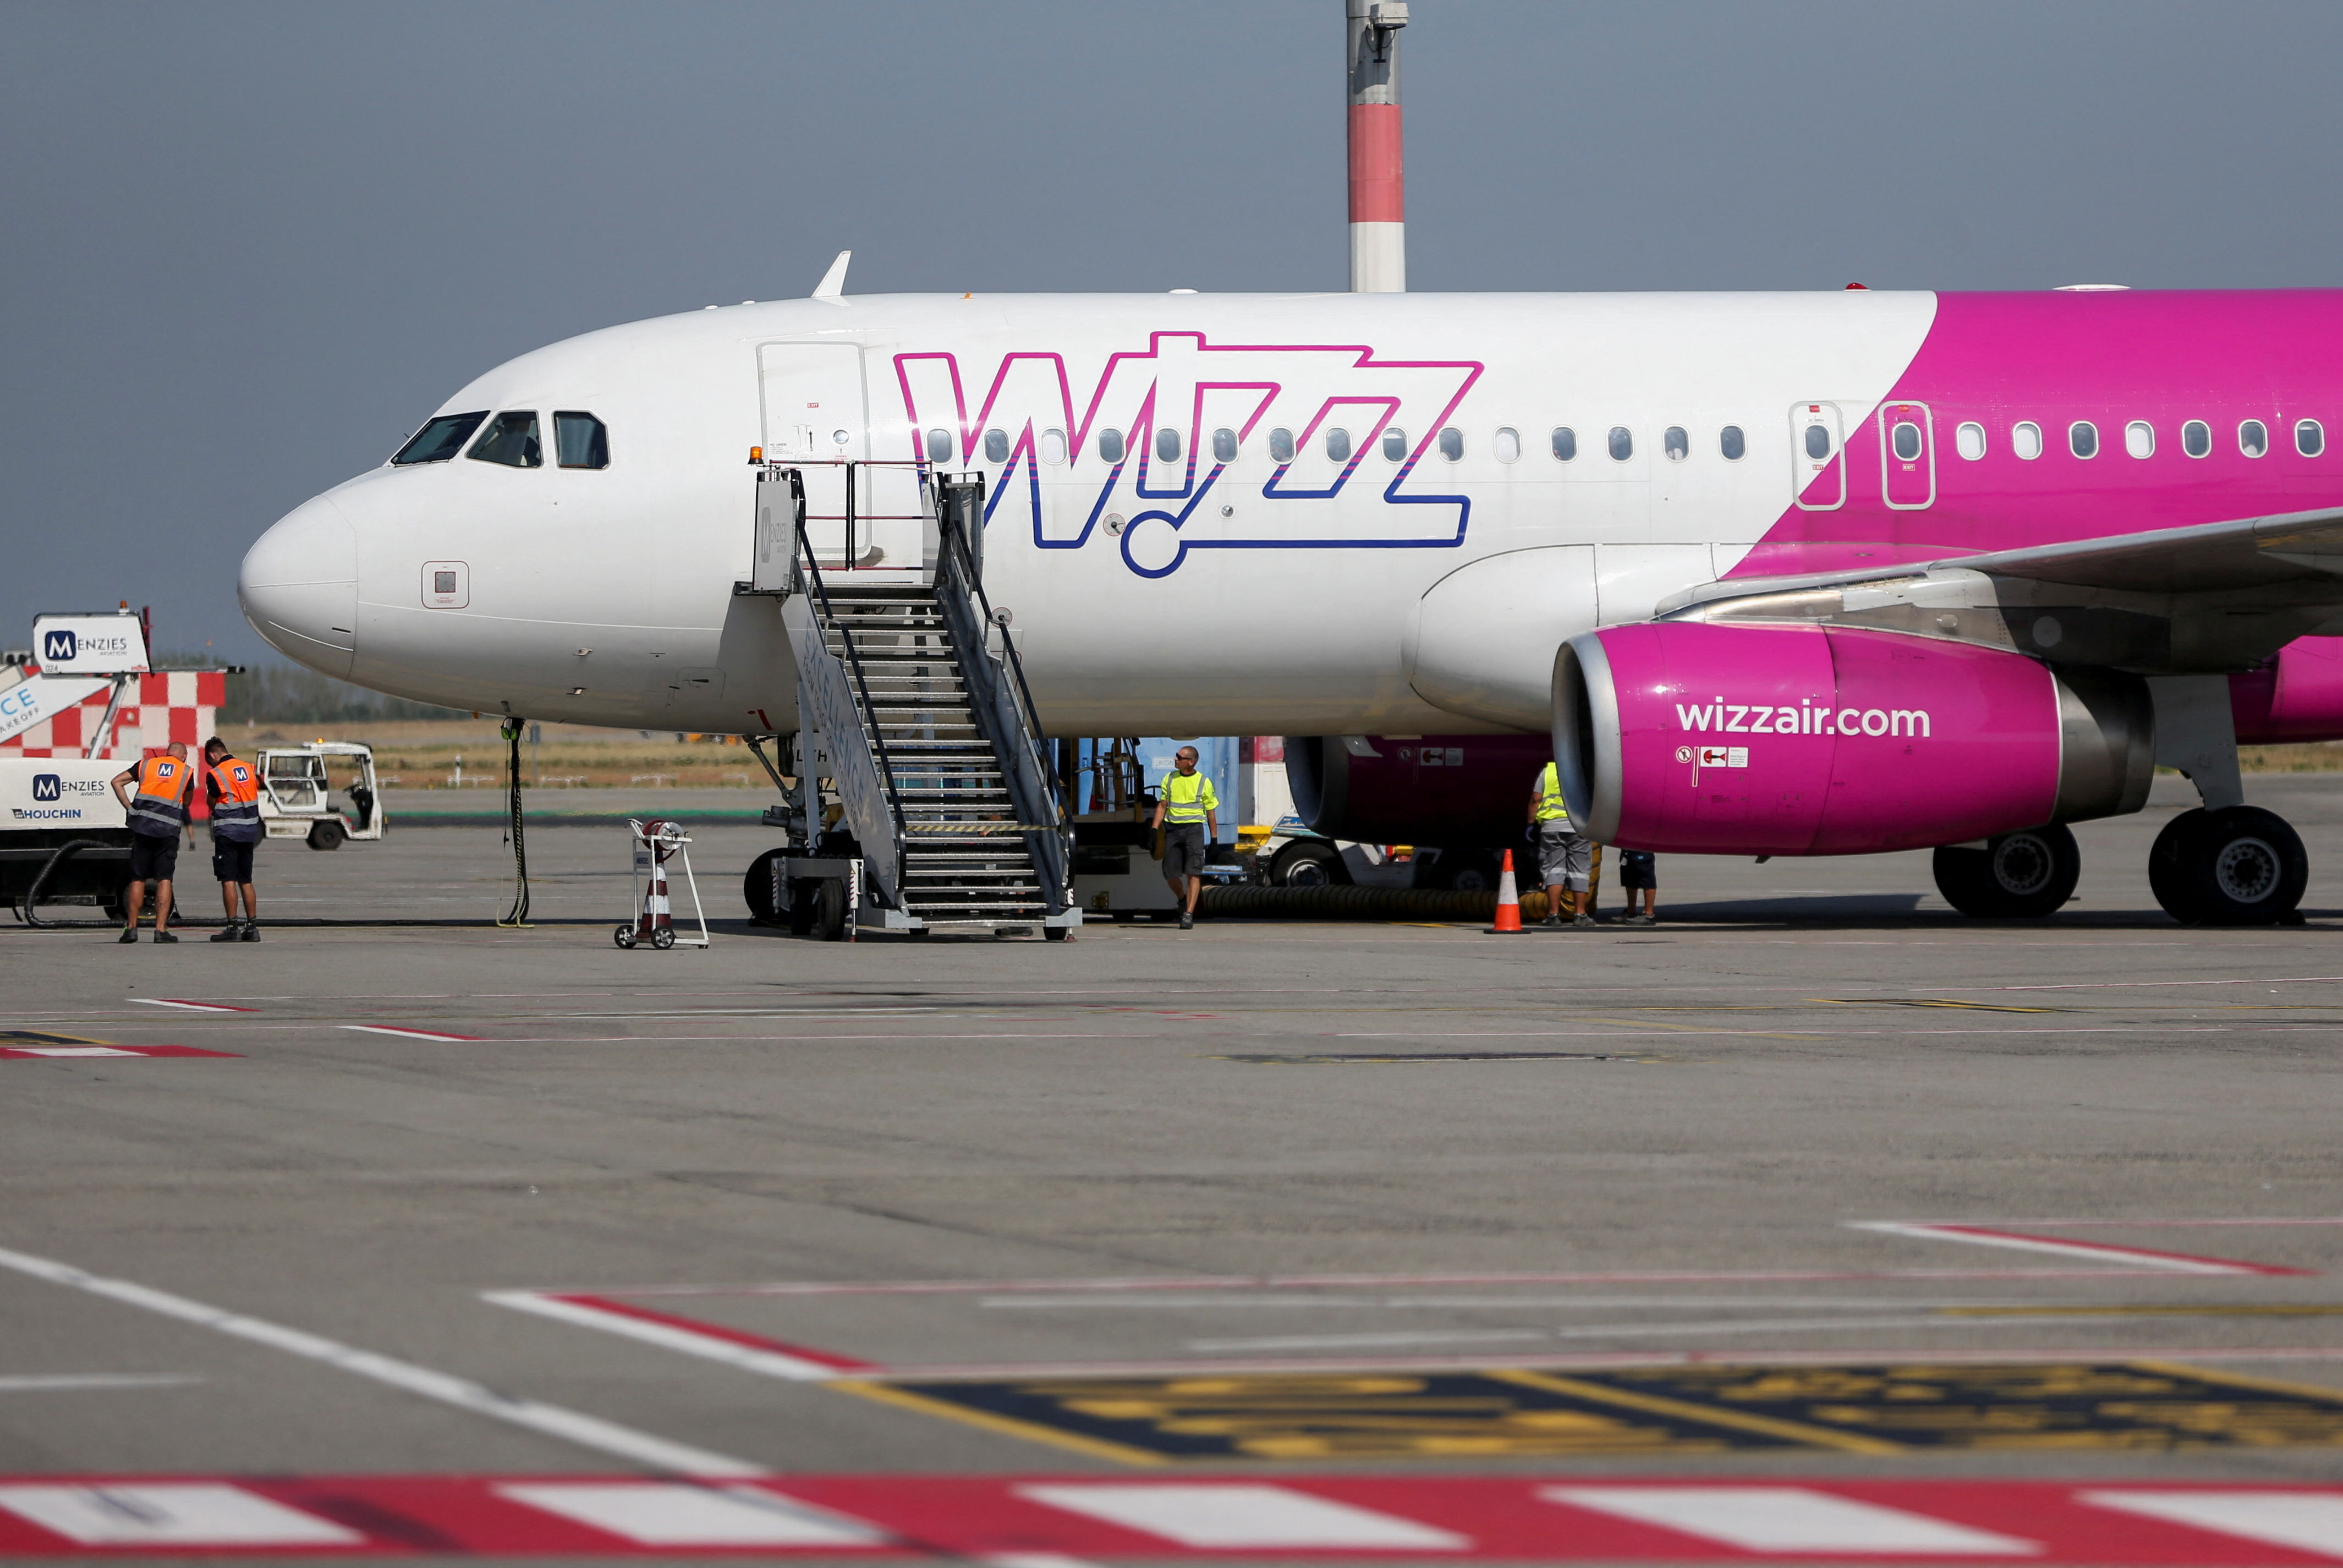 Wizz Air's aircraft is parked on the tarmac at Ferenc Liszt International Airport in Budapest